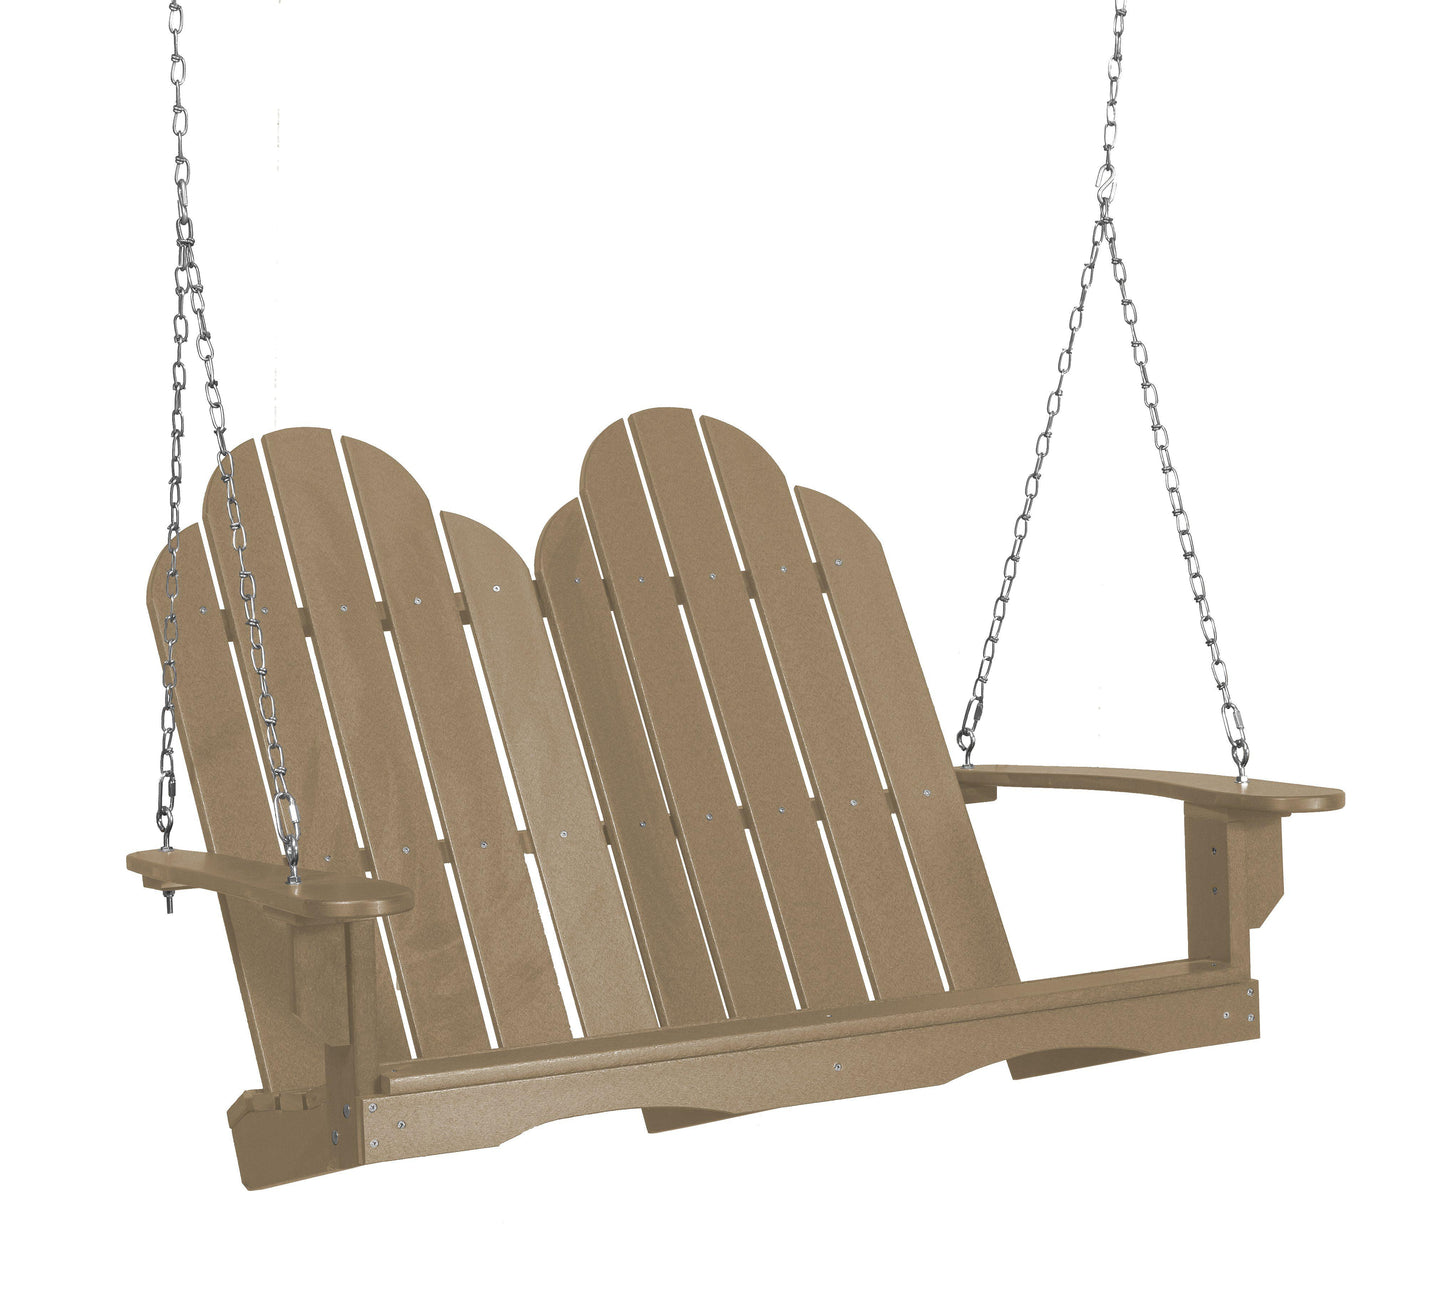 Wildridge Outdoor Recycled Plastic Classic Adirondack 4ft Porch Swing - LEAD TIME TO SHIP 6 WEEKS OR LESS